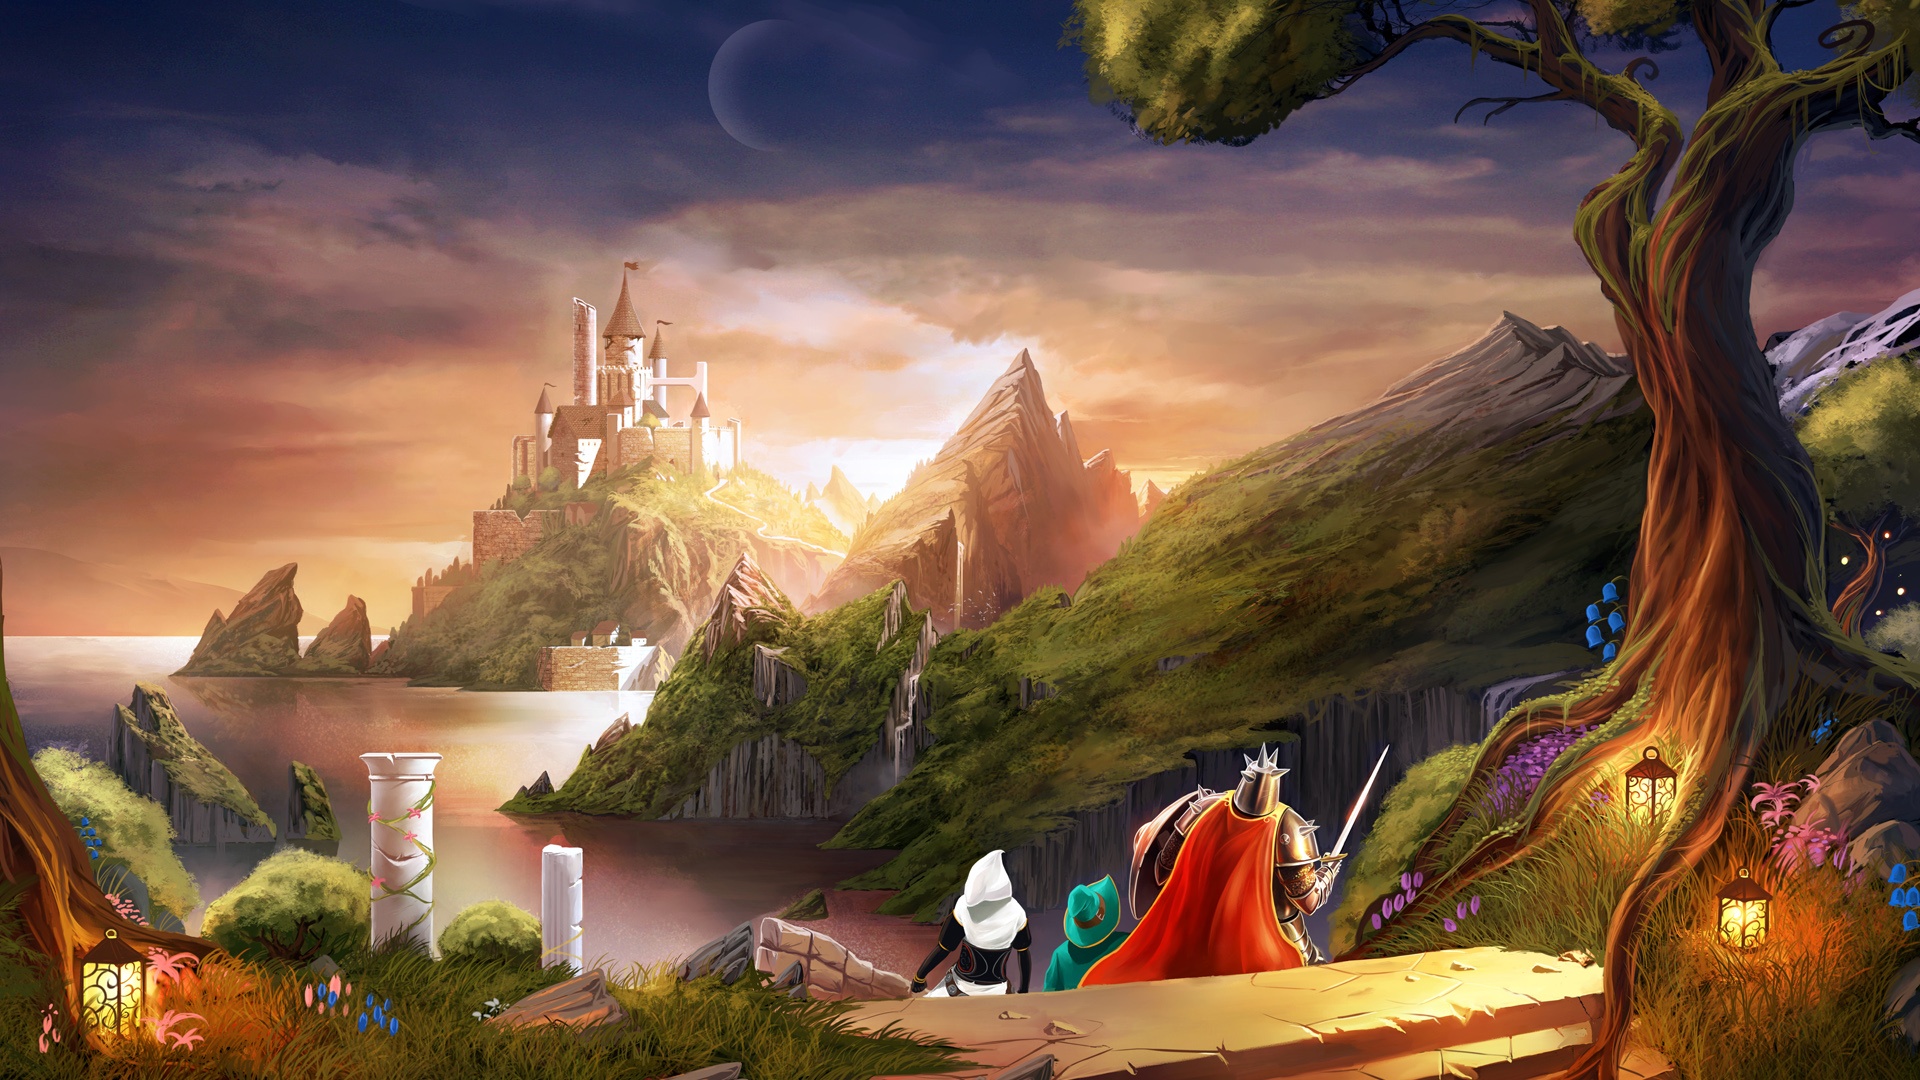 Trine 2 Heading for Castle Wallpapers HD Backgrounds